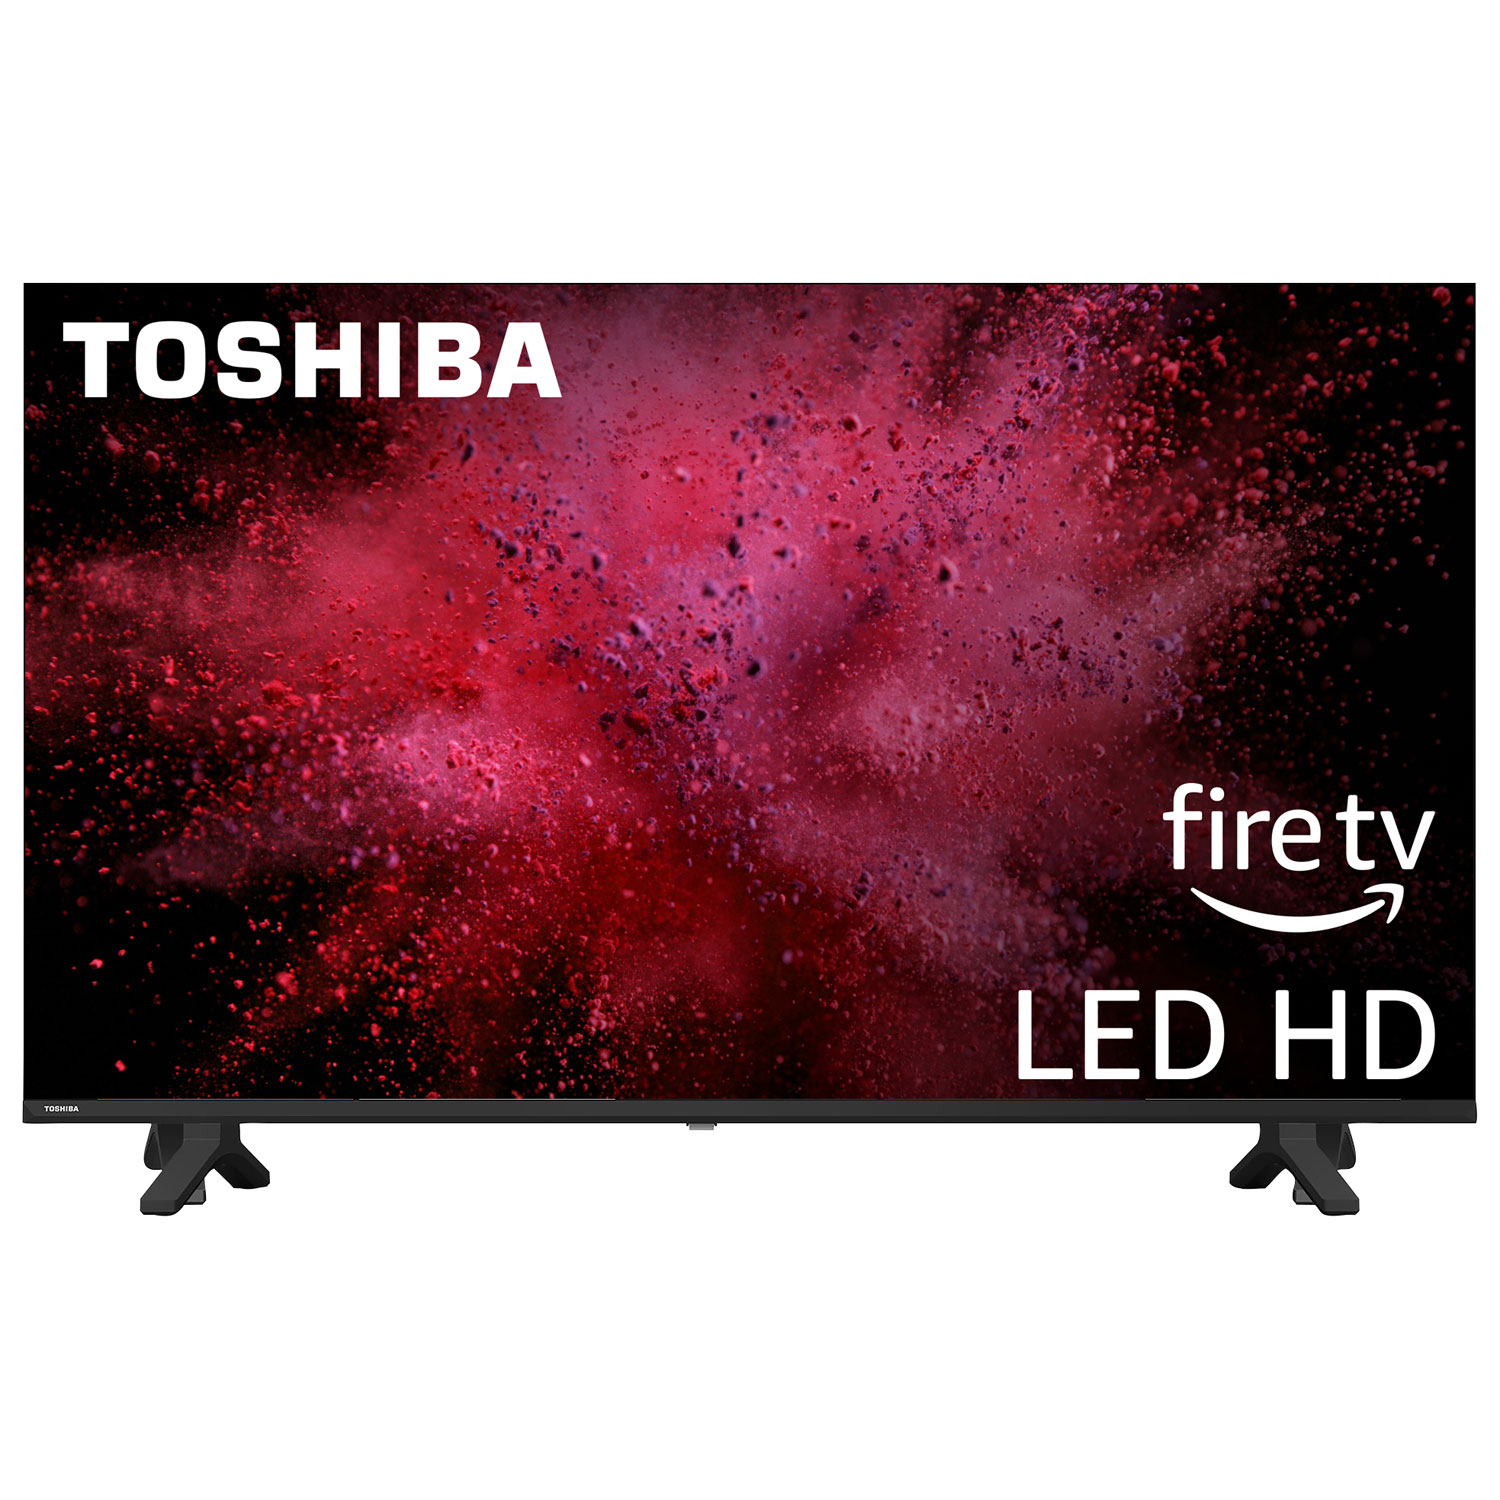 Toshiba 43" 1080p HD LED Smart TV (43V35C) - Fire TV Edition - 2021 - Only at Best Buy